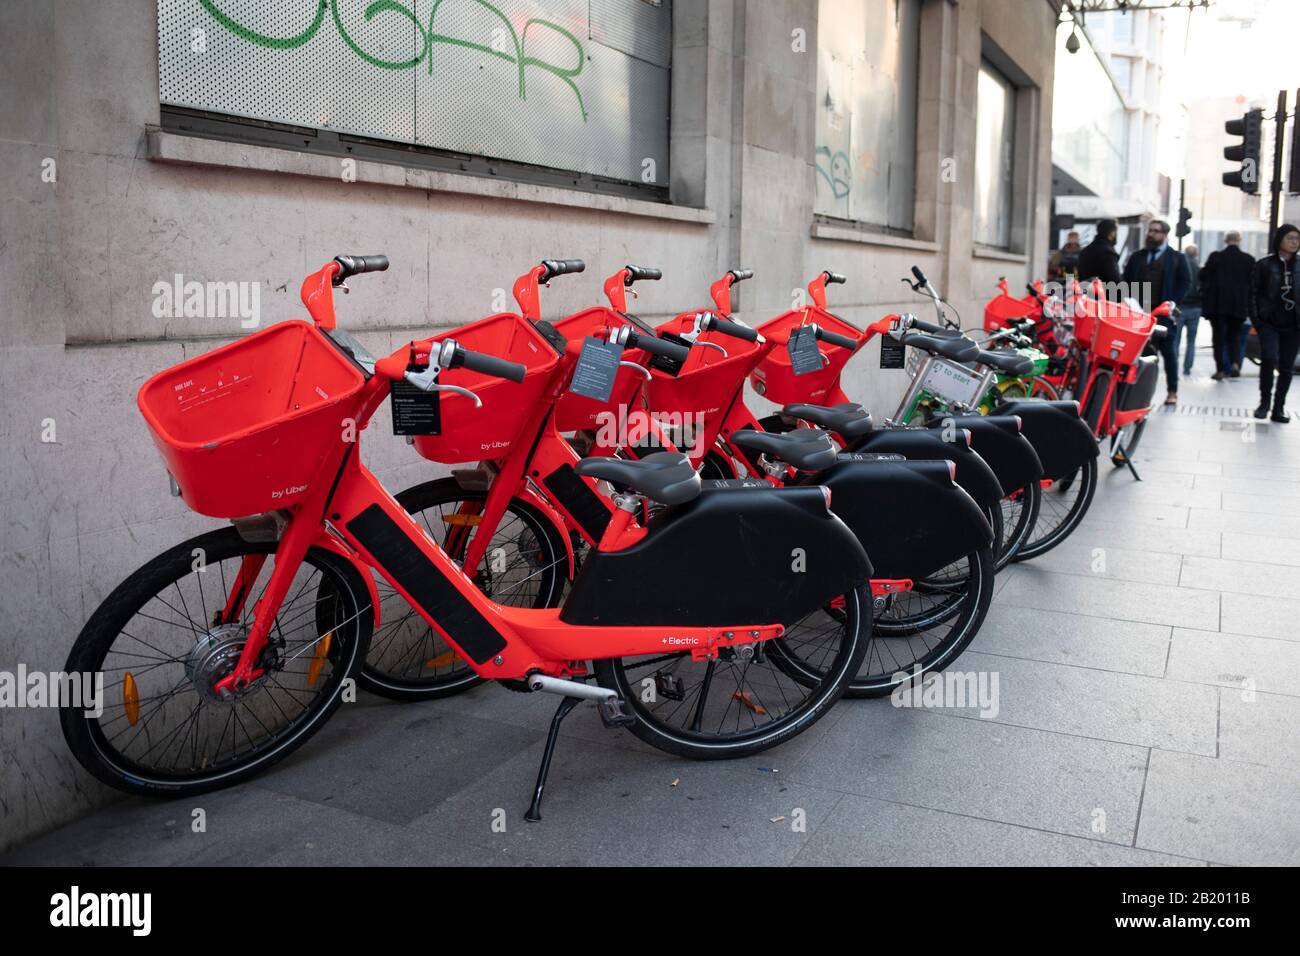 Row of standing Jump dockless bike sharing electric cycles on 21st January 2020 in London, England, United Kingdom. Social Bicycles Inc., doing business as Jump, is a dockless scooter and electric bicycle sharing system operating in the United States, Germany, Portugal and the United Kingdom. The bikes are a bright red orange. They can be located using the Jump or Uber apps, and users are charged to their Uber account. Stock Photo